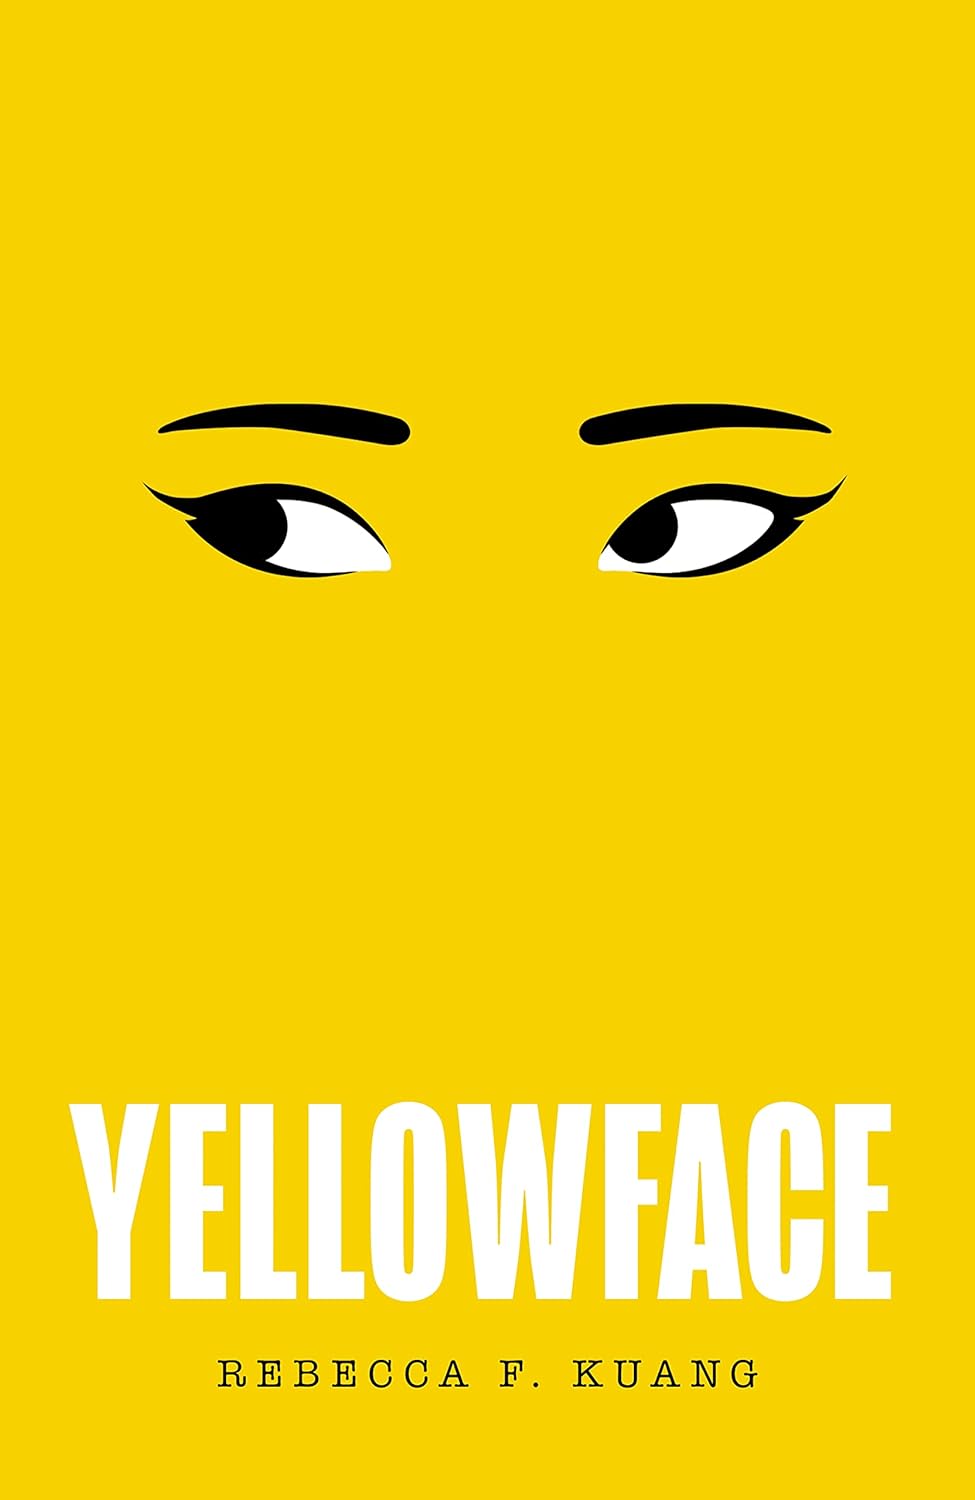 Cover of "Yellowface" by R.F. Kuang